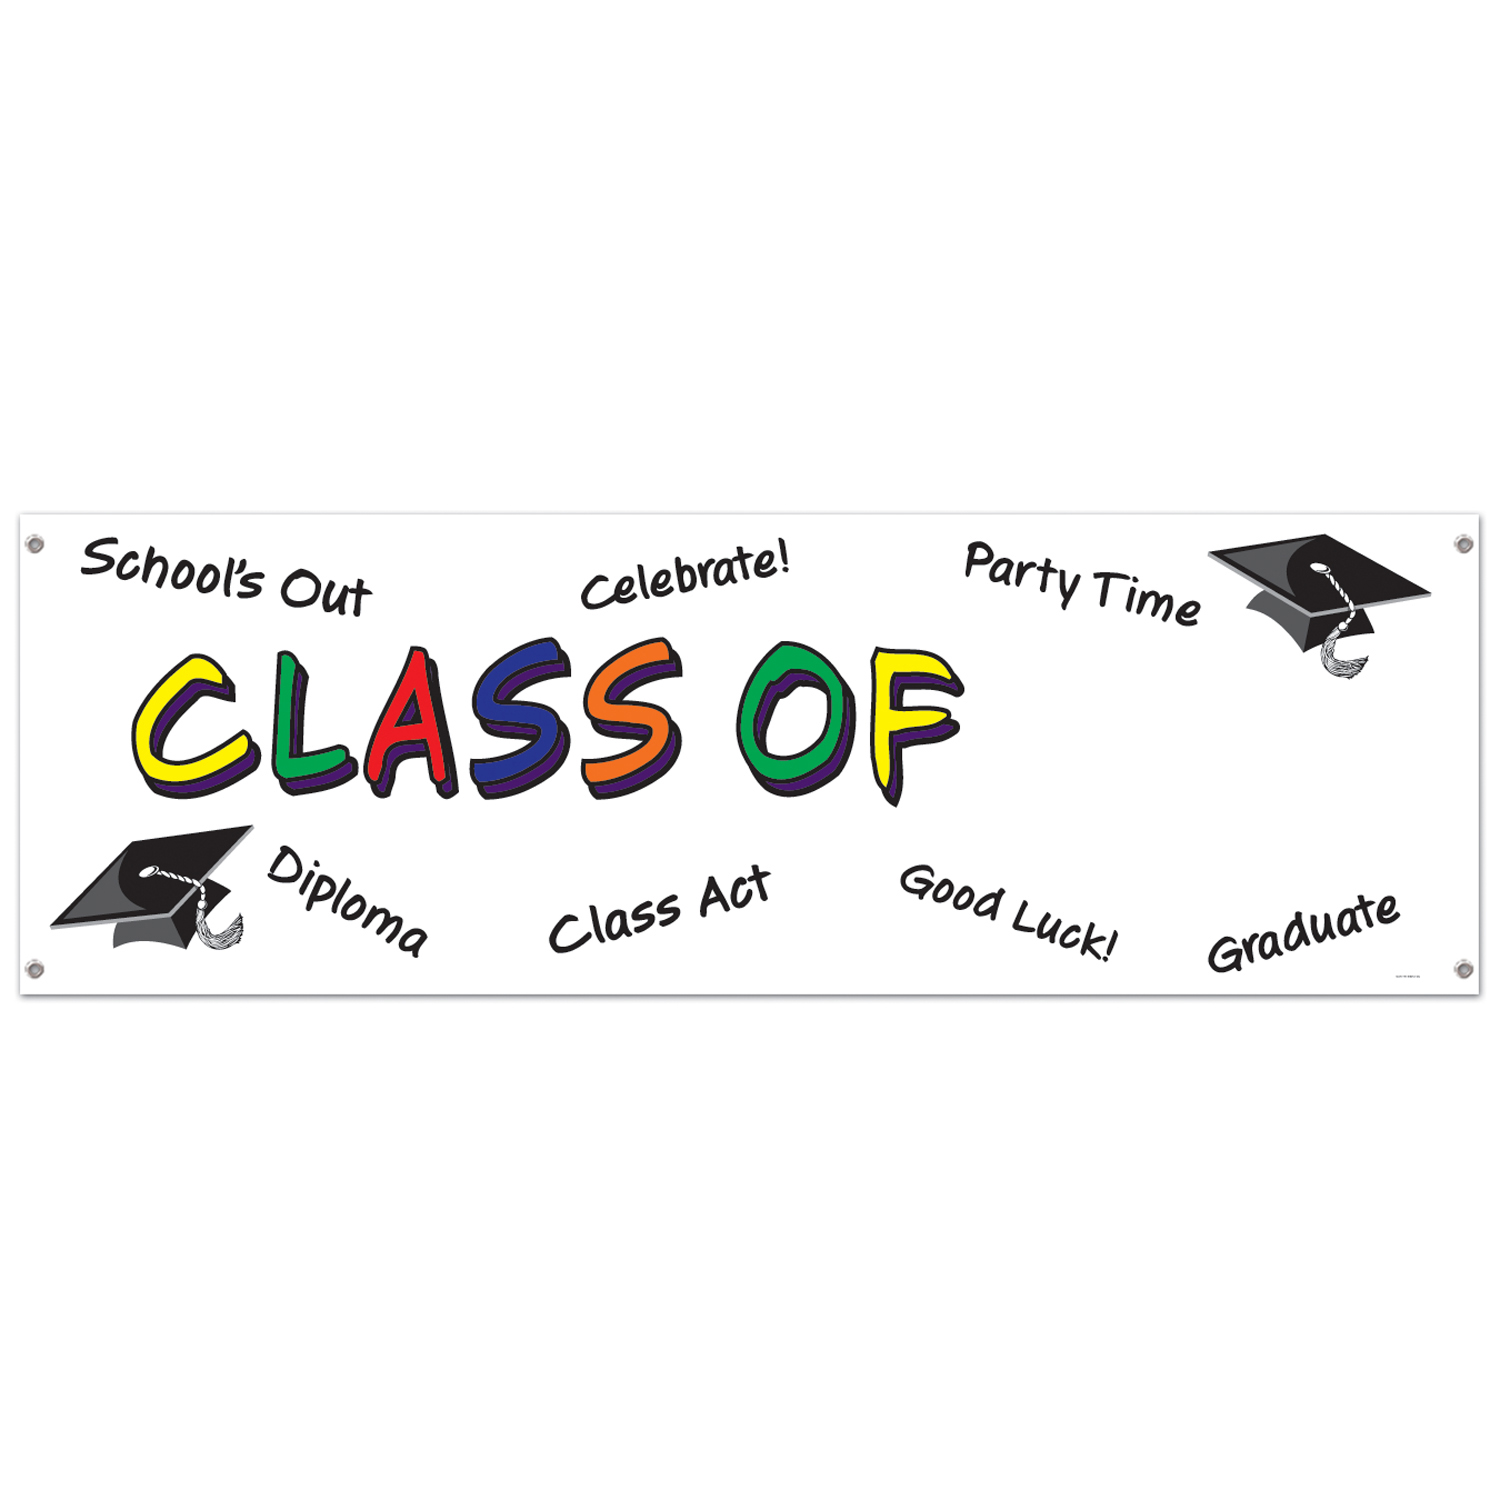 ''Class Of ''''''''''''''''Year'''''''''''''''' SIGN Banner''''''''''